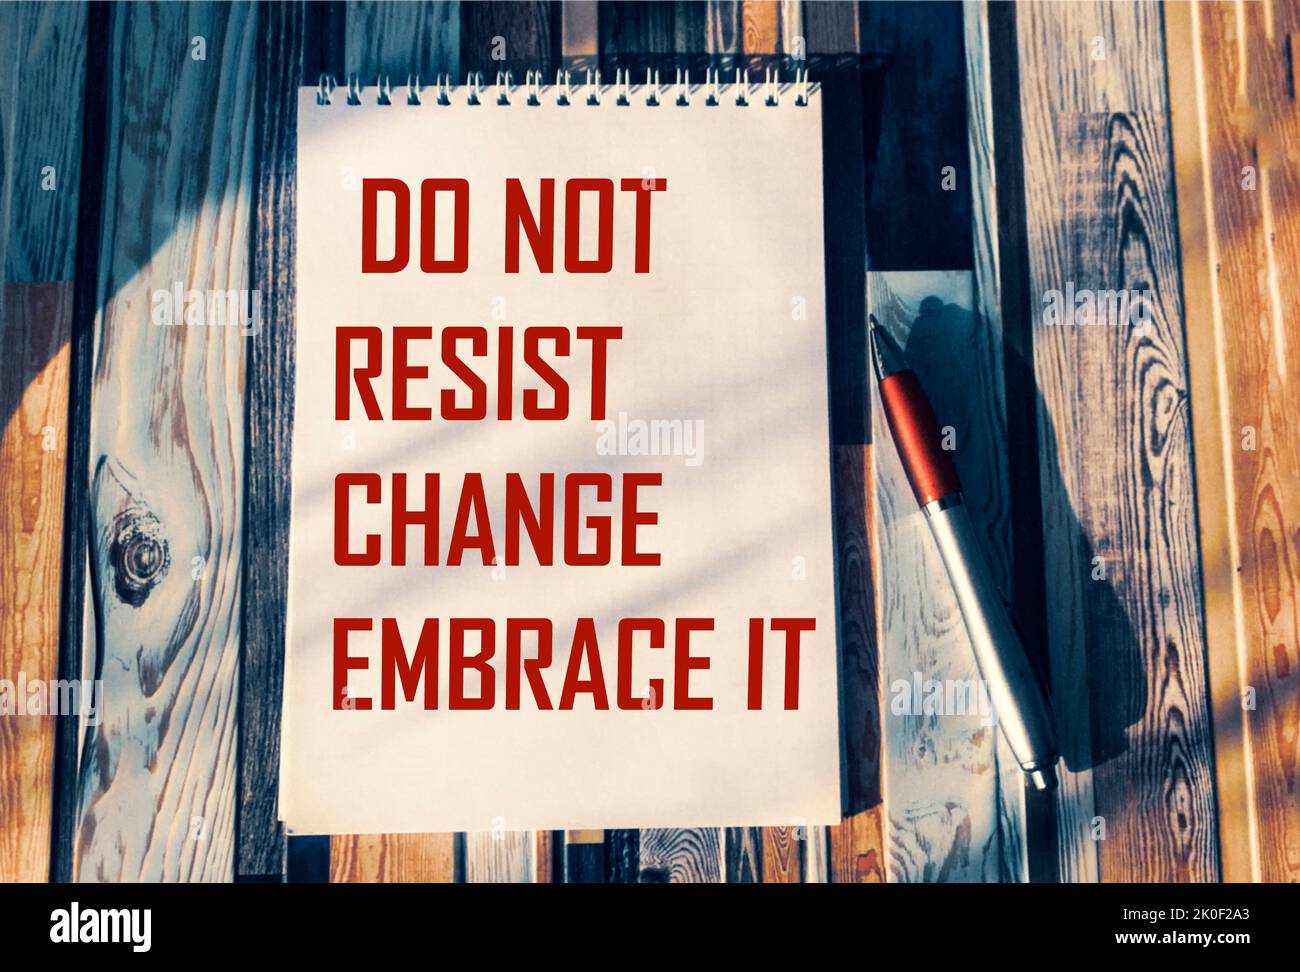 do not resist change, embrace it - motivational phrase on notepad with pen and vintage background Stock Photo